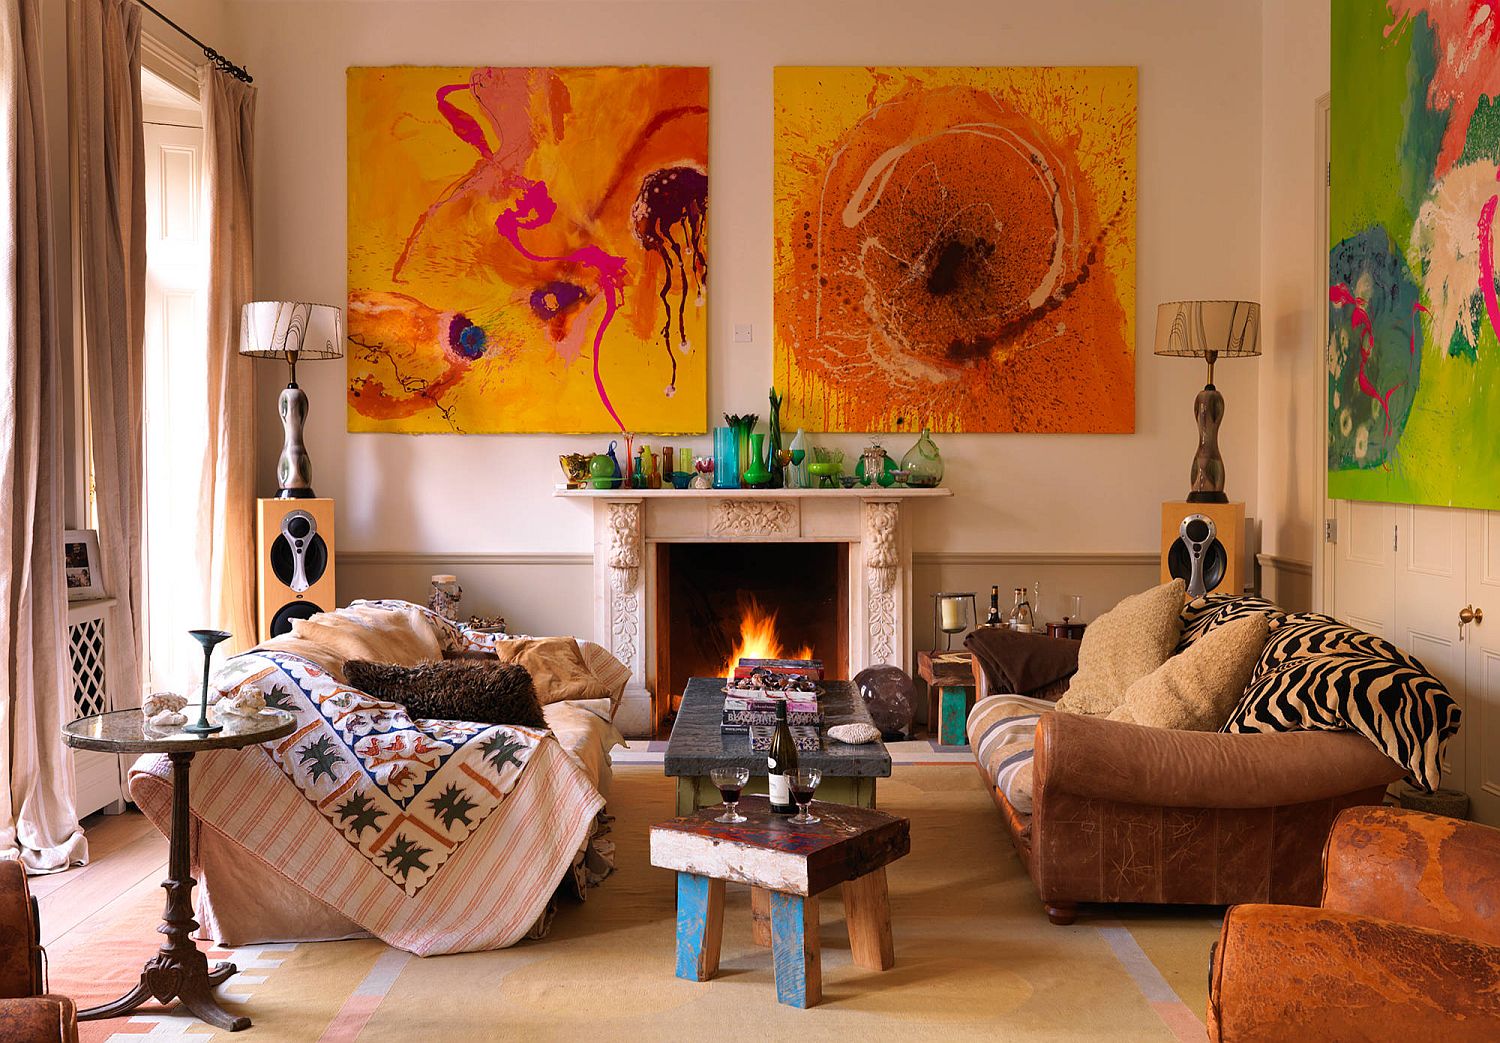 Blend-of-fabrics-bright-wall-art-and-a-cozy-fireplace-come-together-to-create-this-fabulous-living-space-56436